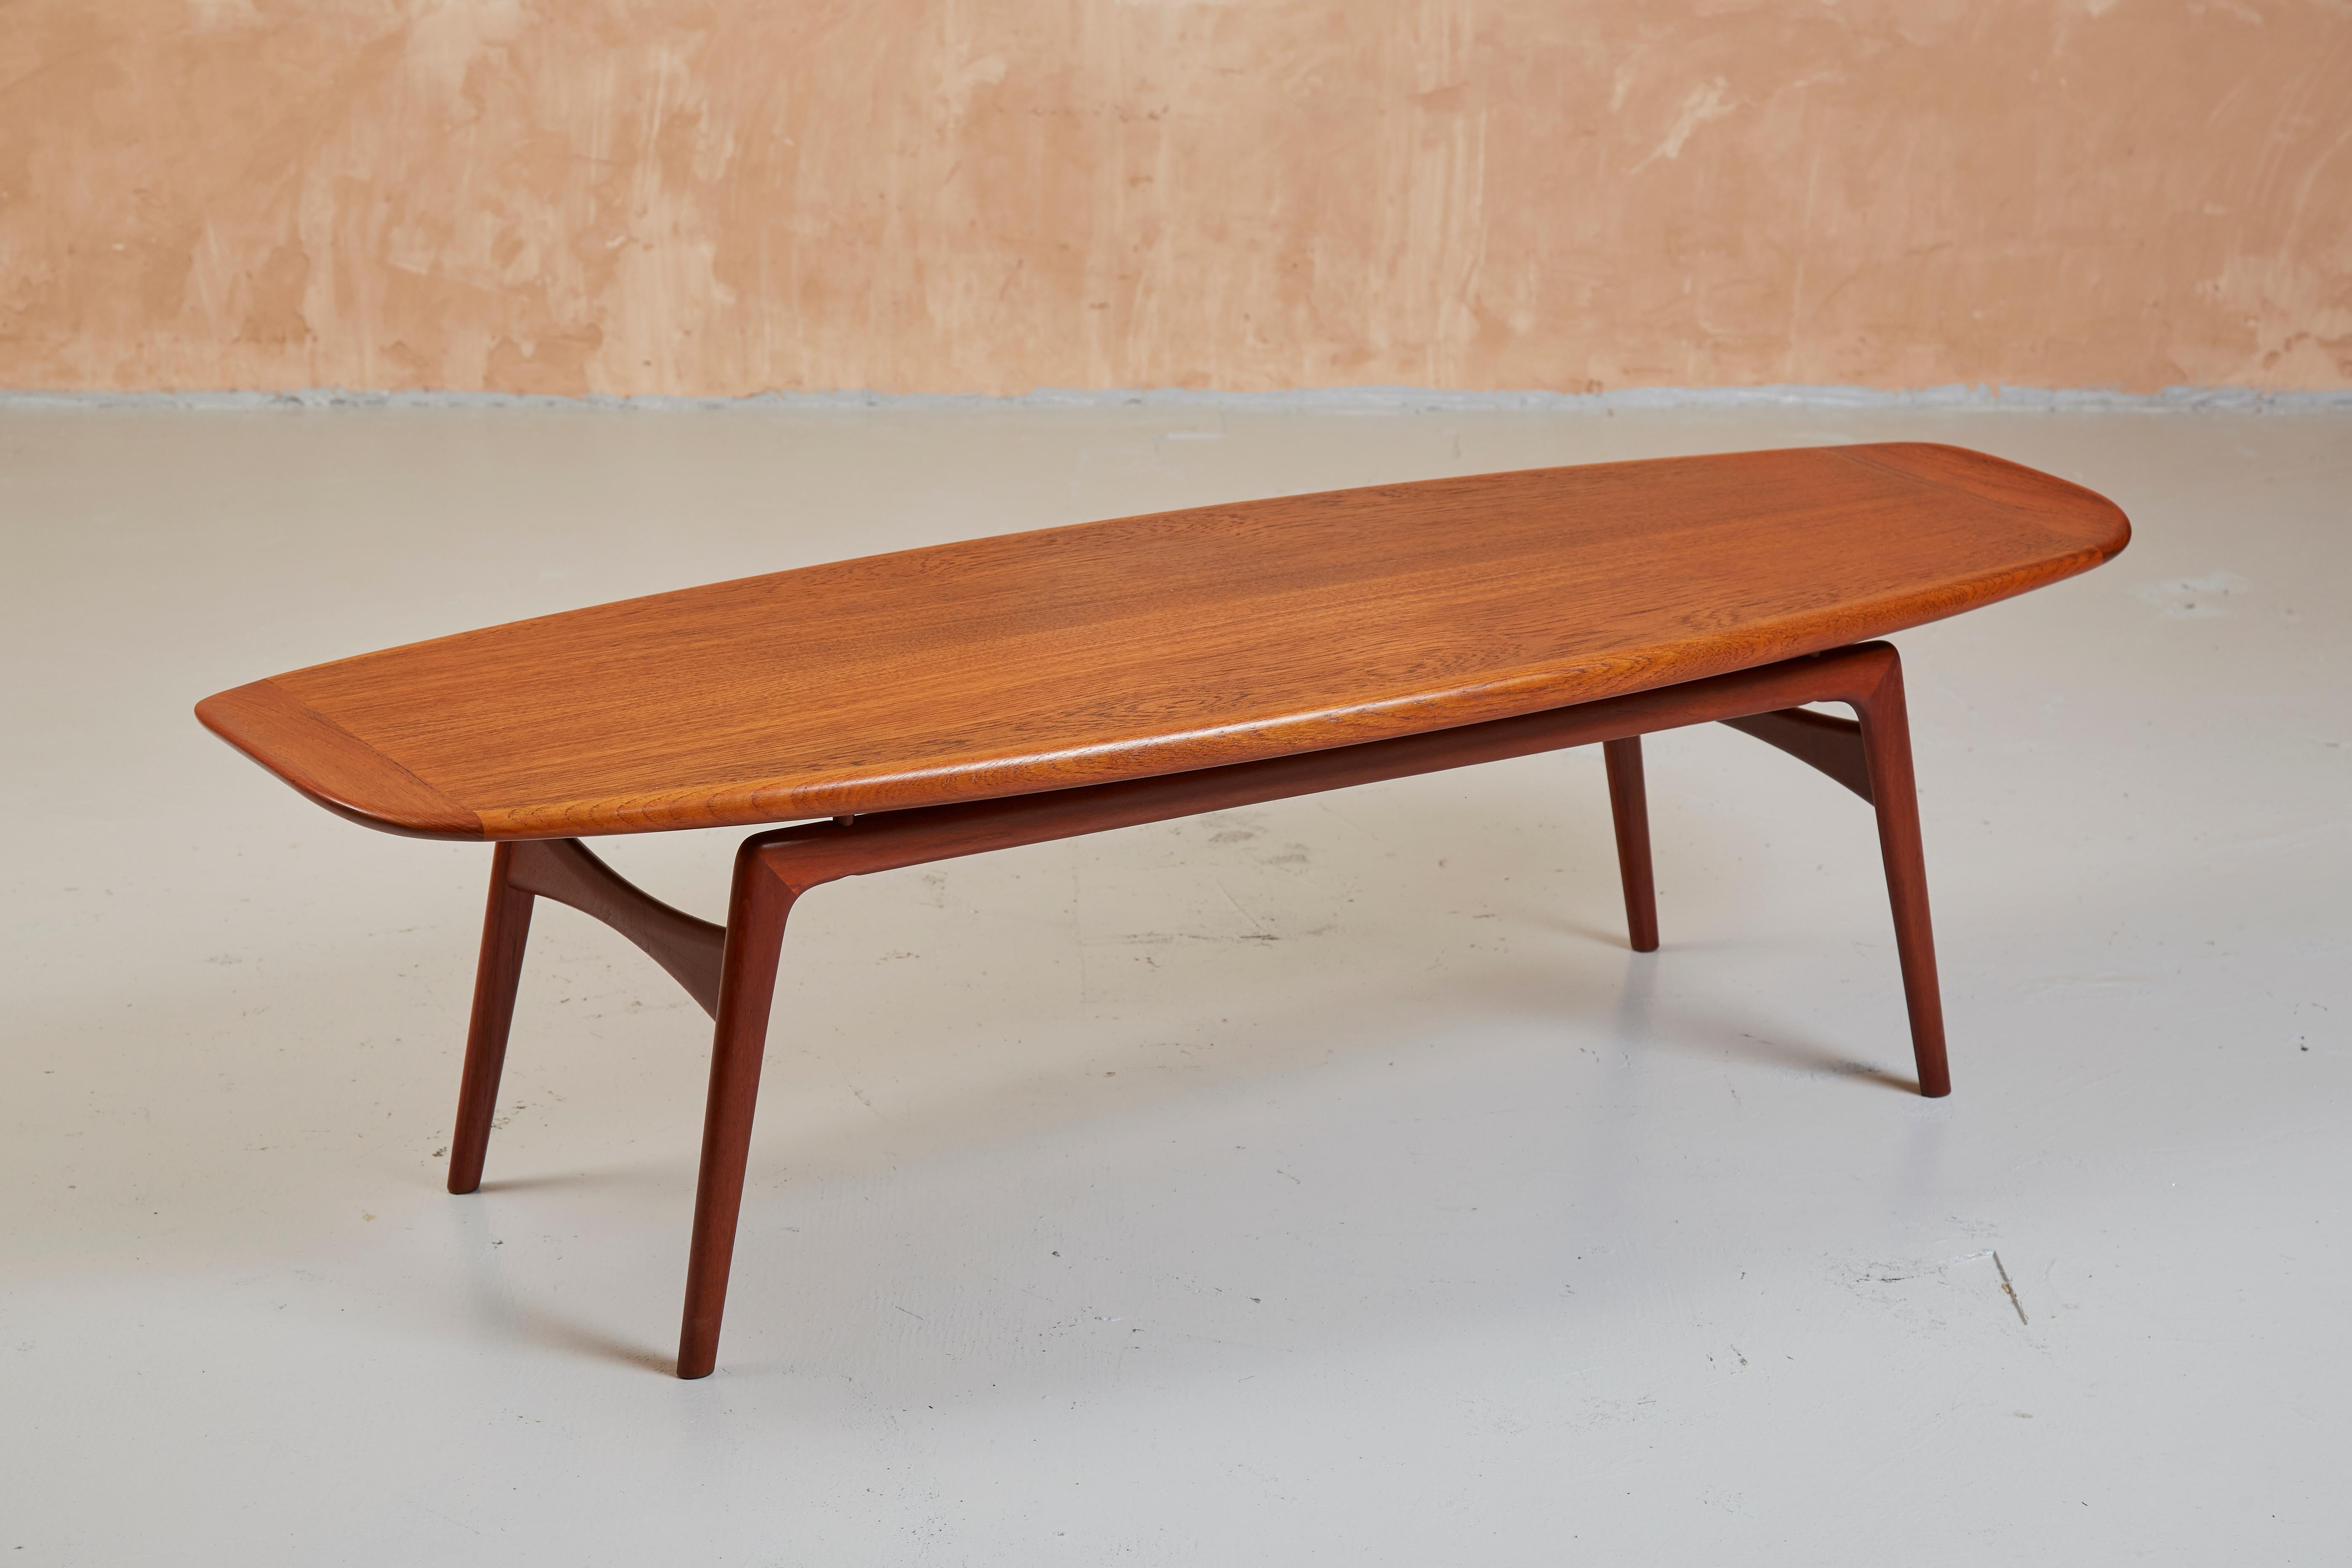 Teak 'Surfboard' table by Mogens Kold

An iconic design by Arne Hovmand Olsen for Mogens Kold produced in Denmark in the 1960s.

The long, sweeping teak table-top with upturned ends leads to this classic often being referred to as the